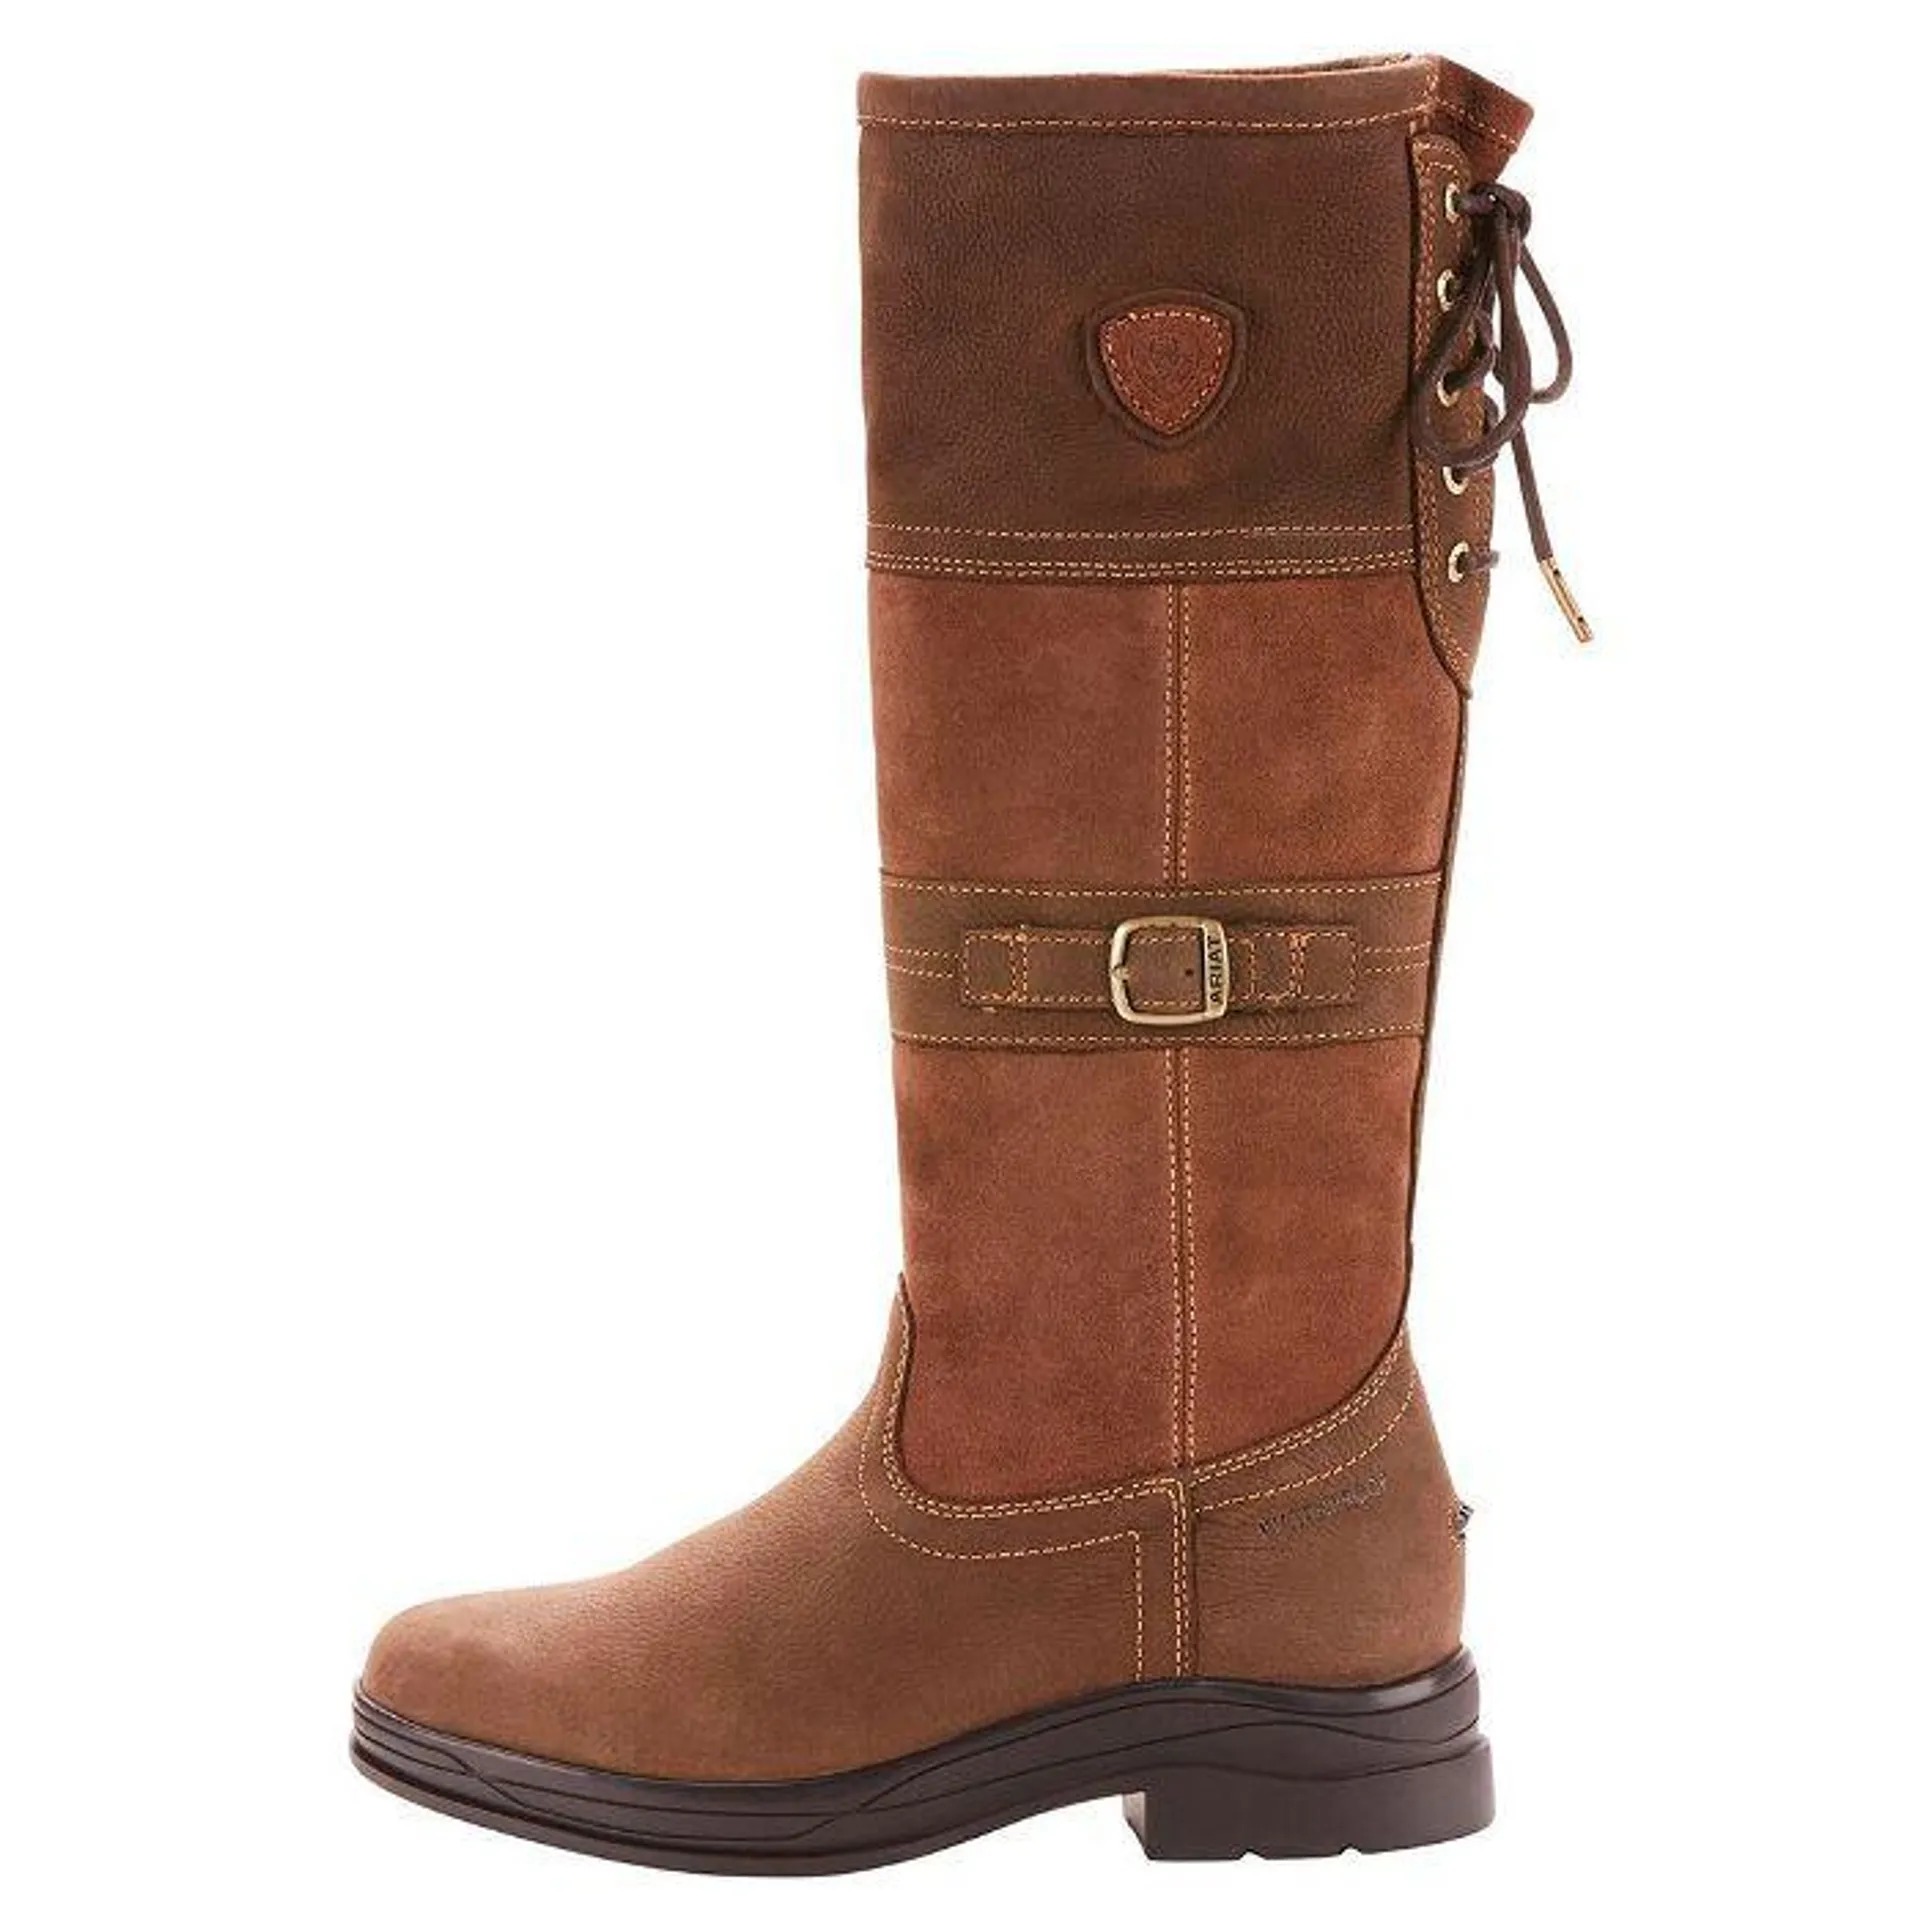 Ariat Langdale H2O Ladies Country Boots - Java